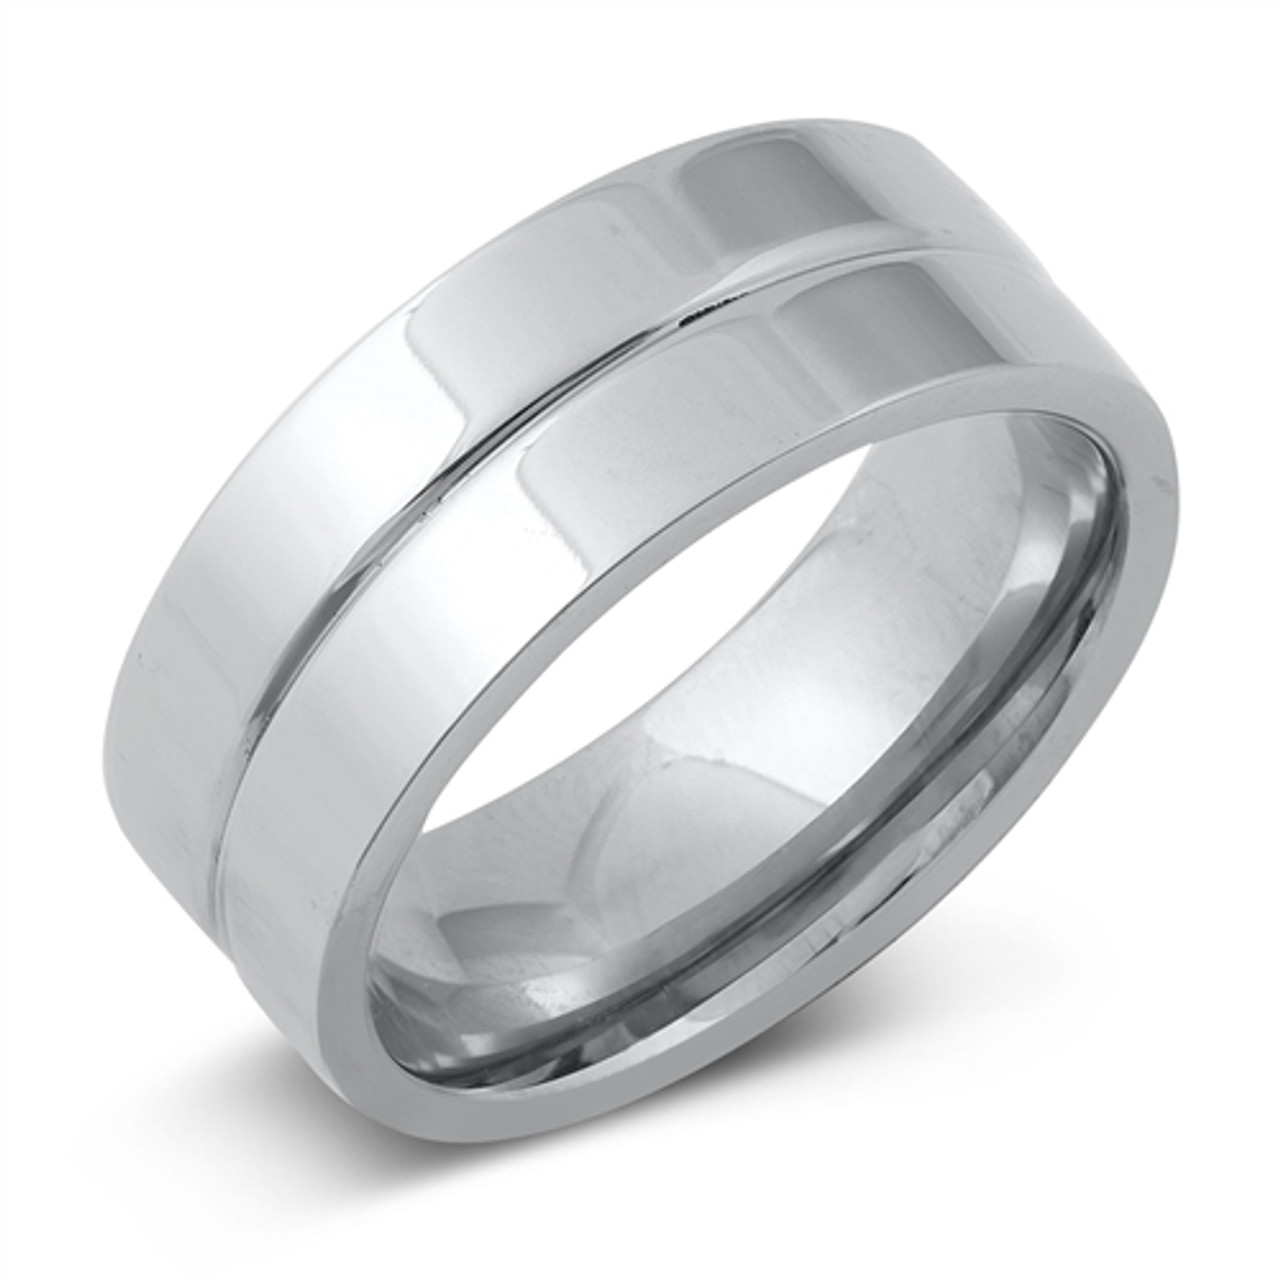 Personalized Stainless Steel 8mm Band Ring - ForeverGifts.com